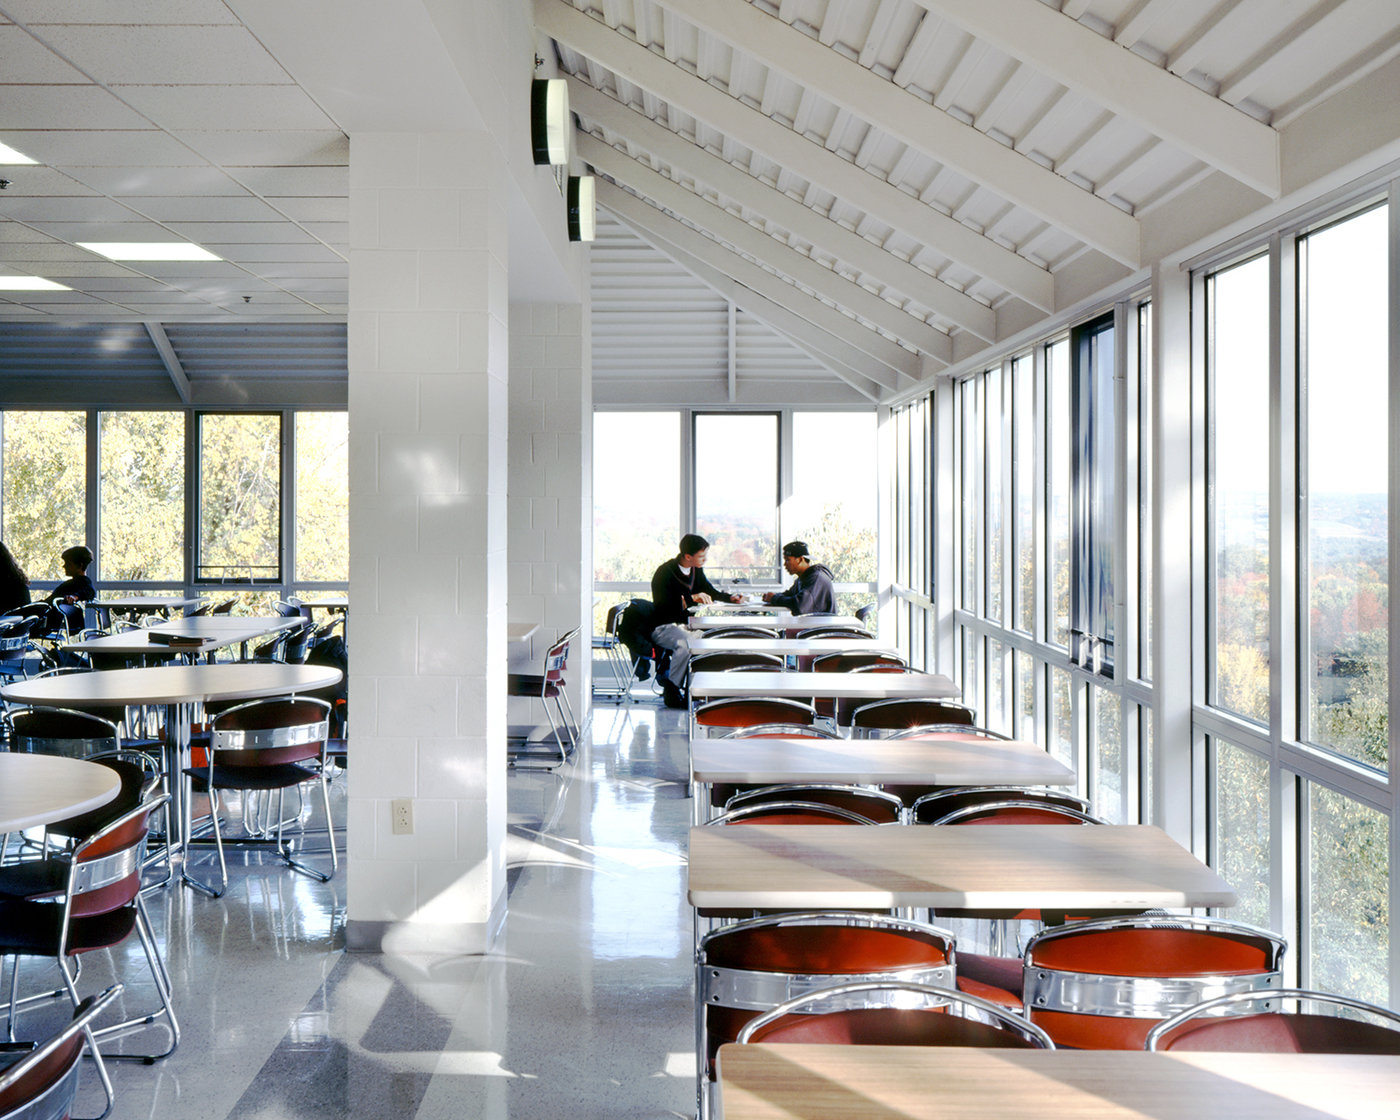 10 tskp woodstock academy master plan expansion interior detail cafeteria 1400 0x0x1500x1200 q85